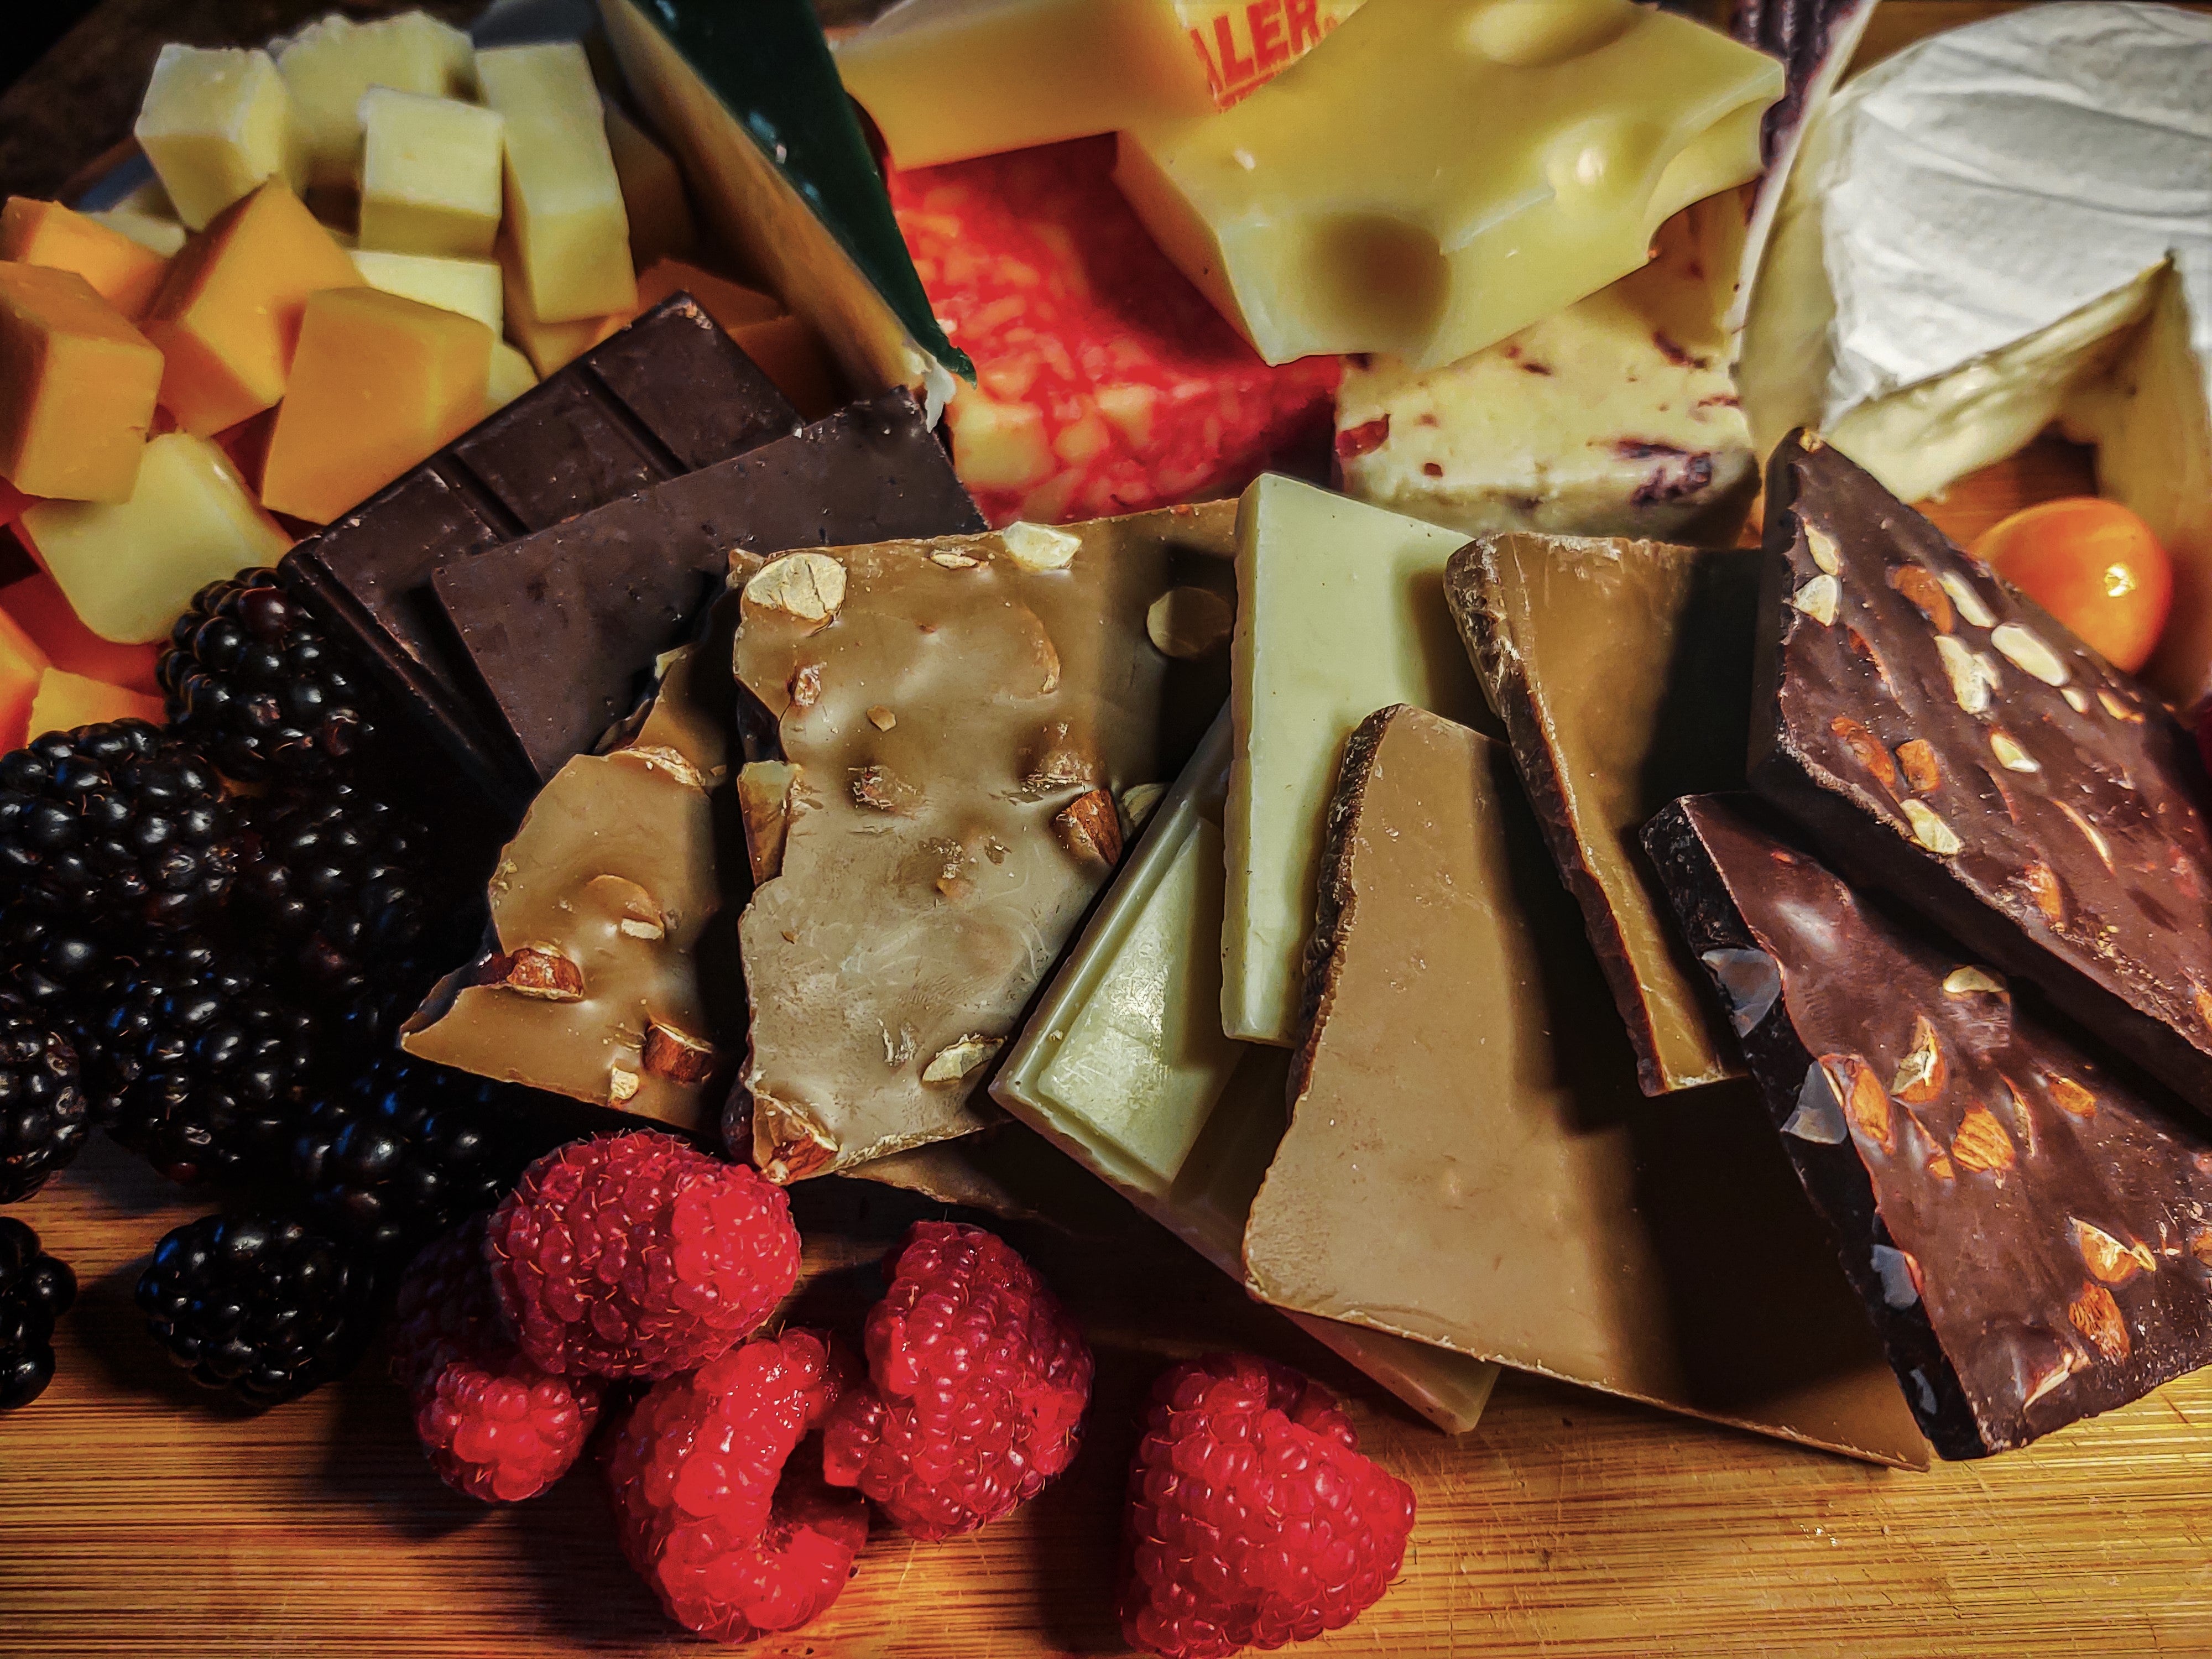 Pictured: a charcuterie board filled with various fruits and cheeses. In the center of the board are all five flavor offerings from the Simplicity Chocolate brand.